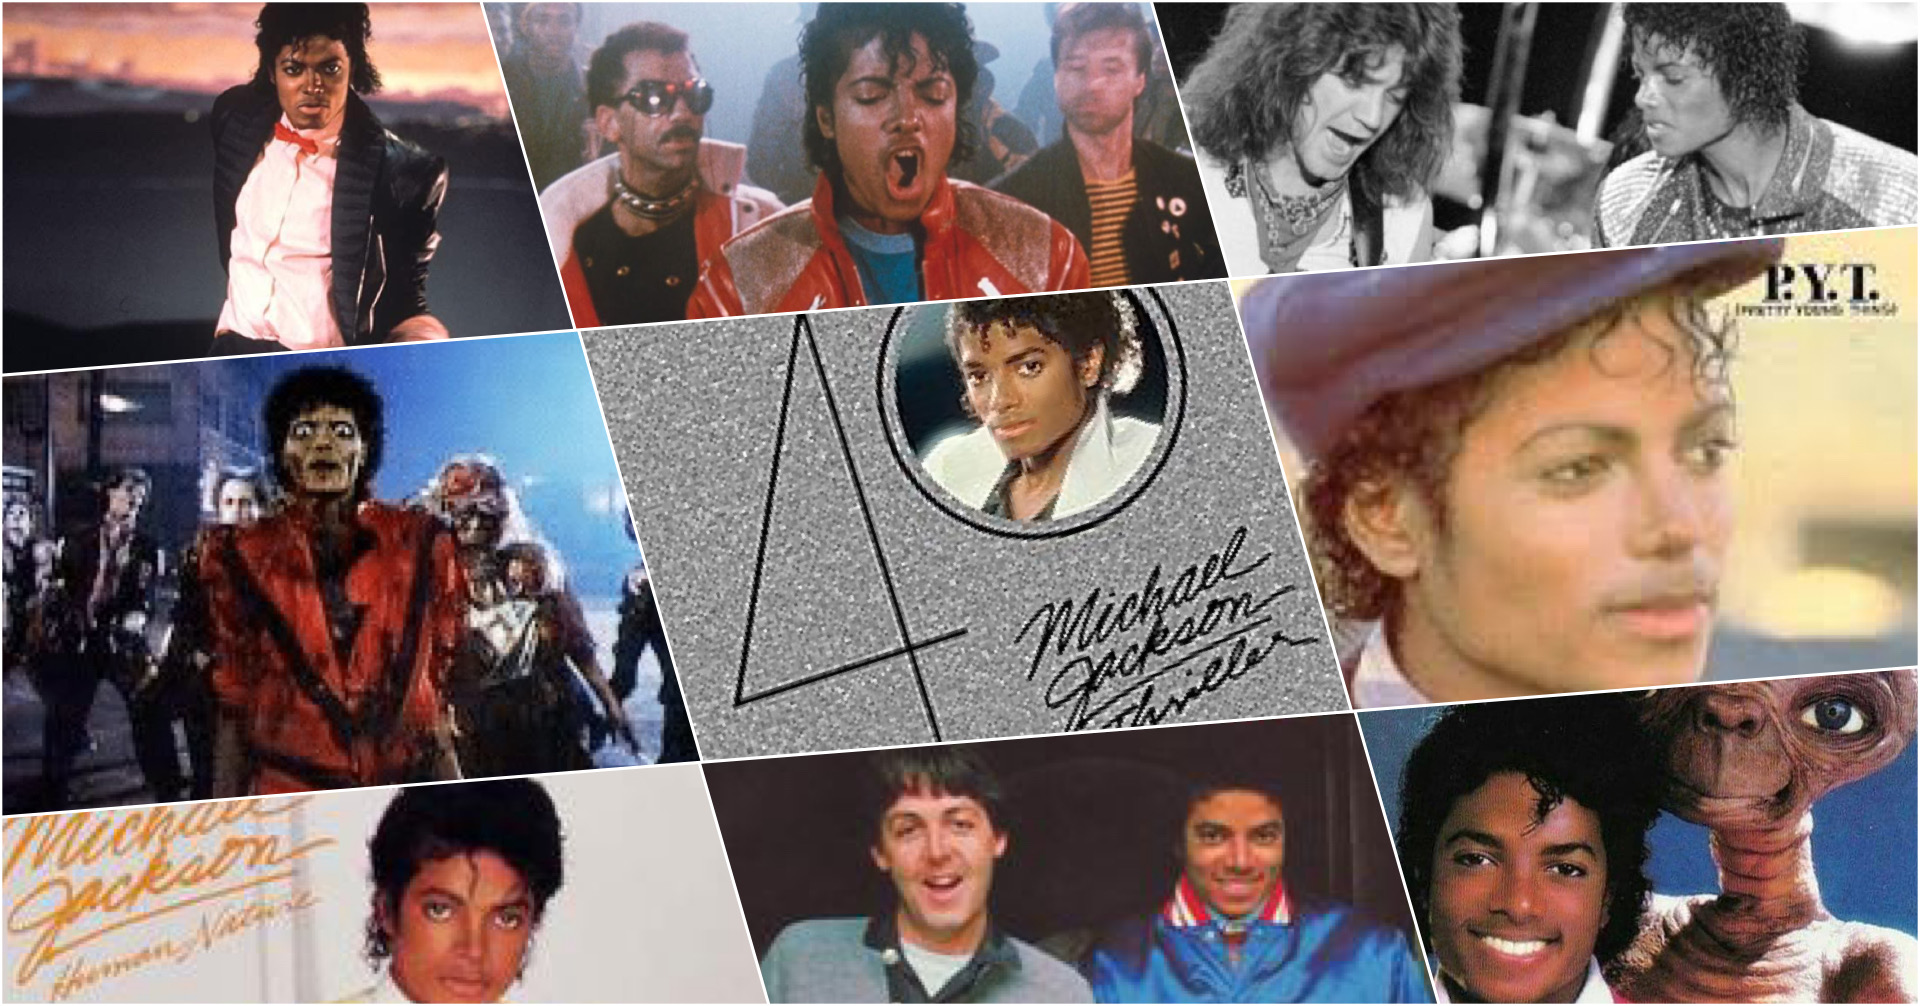 MICHAEL JACKSON AT HIS BEST: POST THRILLER  1984 (For the Love of Pop's  Greatest Year)